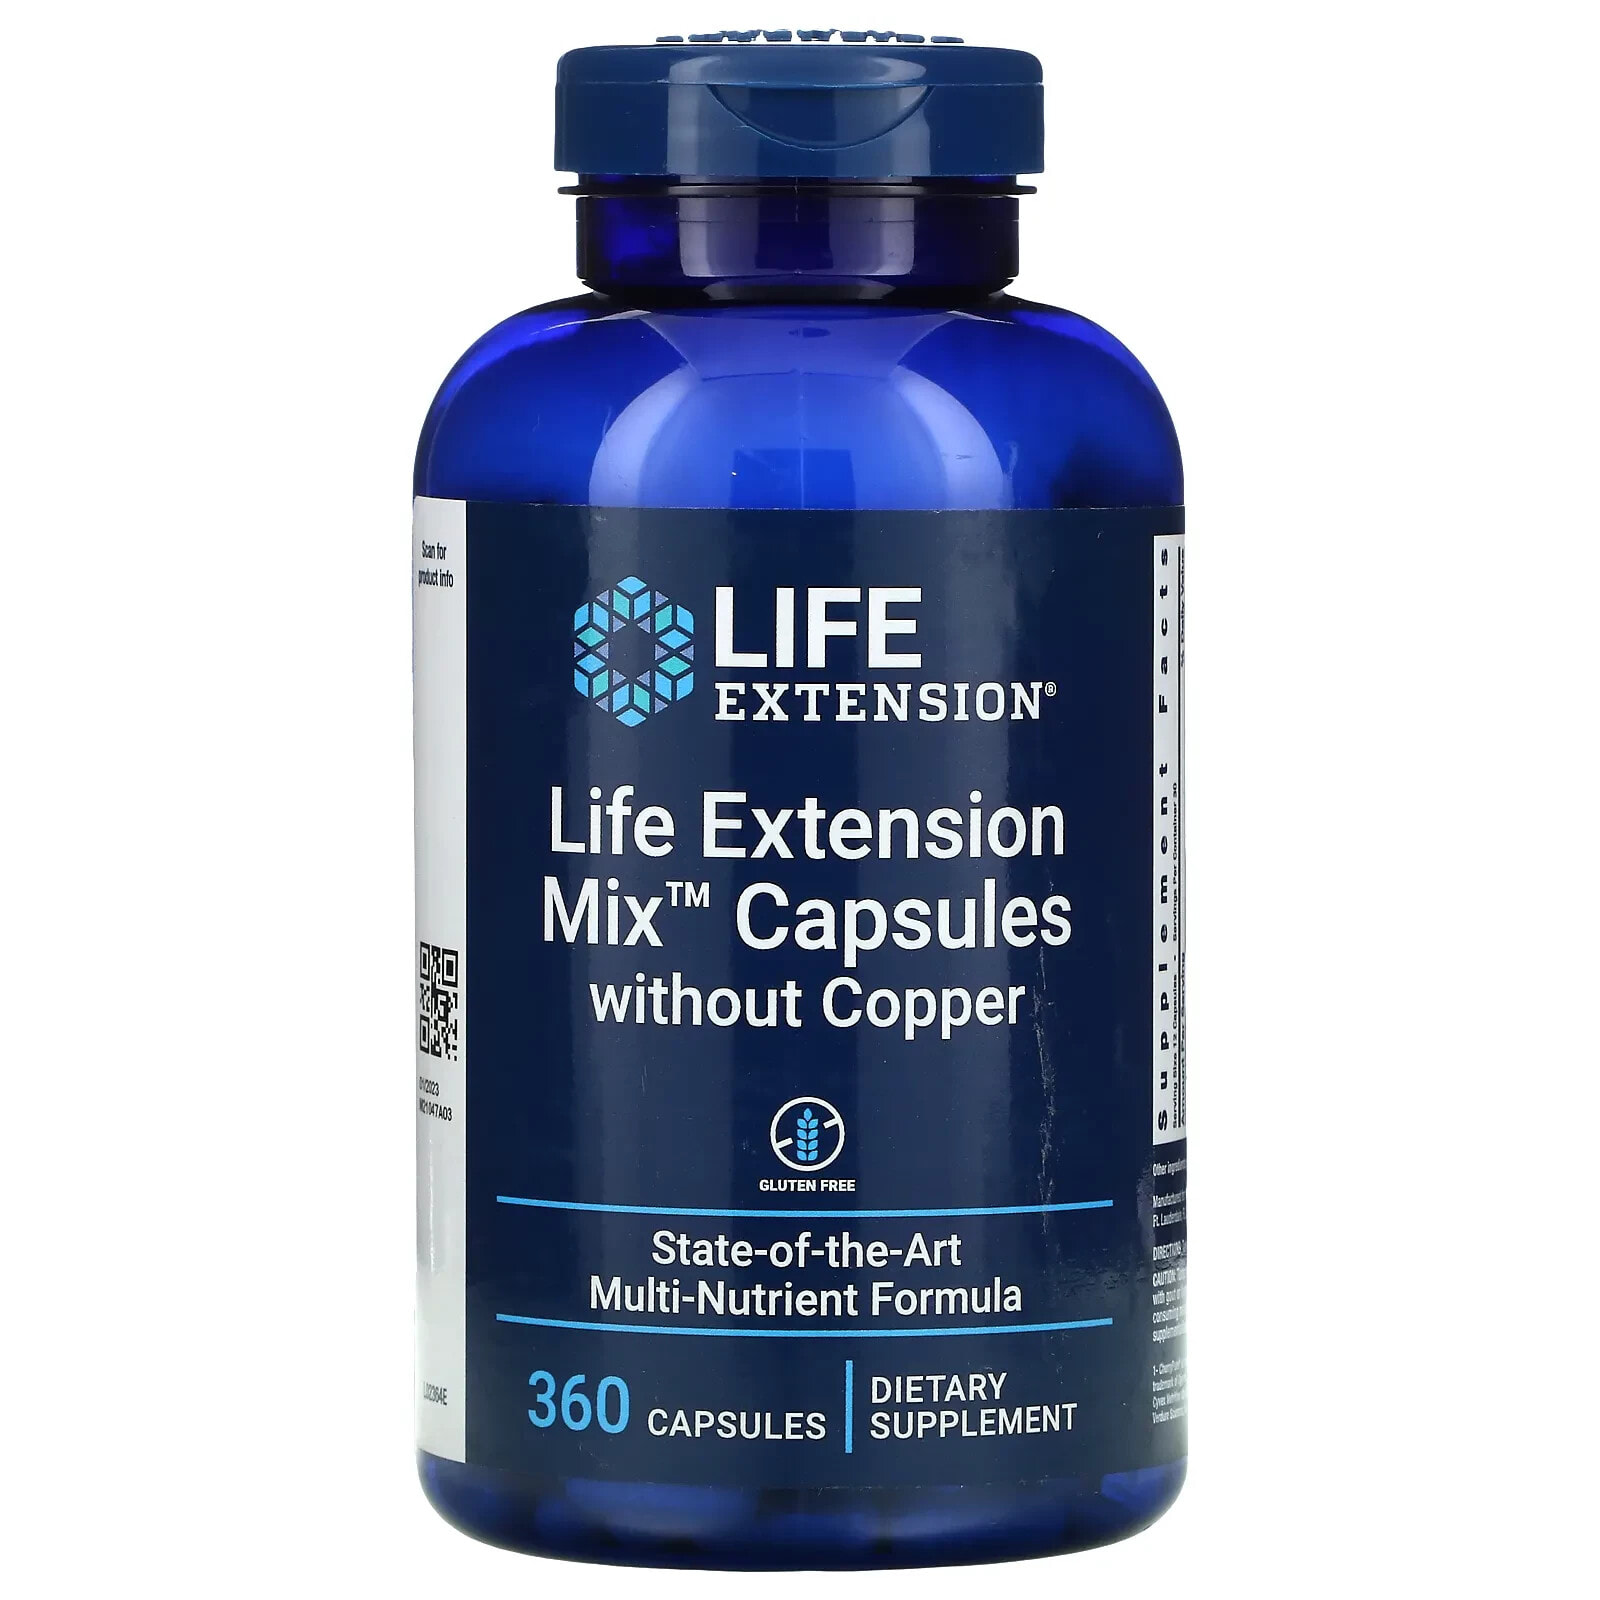 Mix Capsules without Copper, 360 Capsules